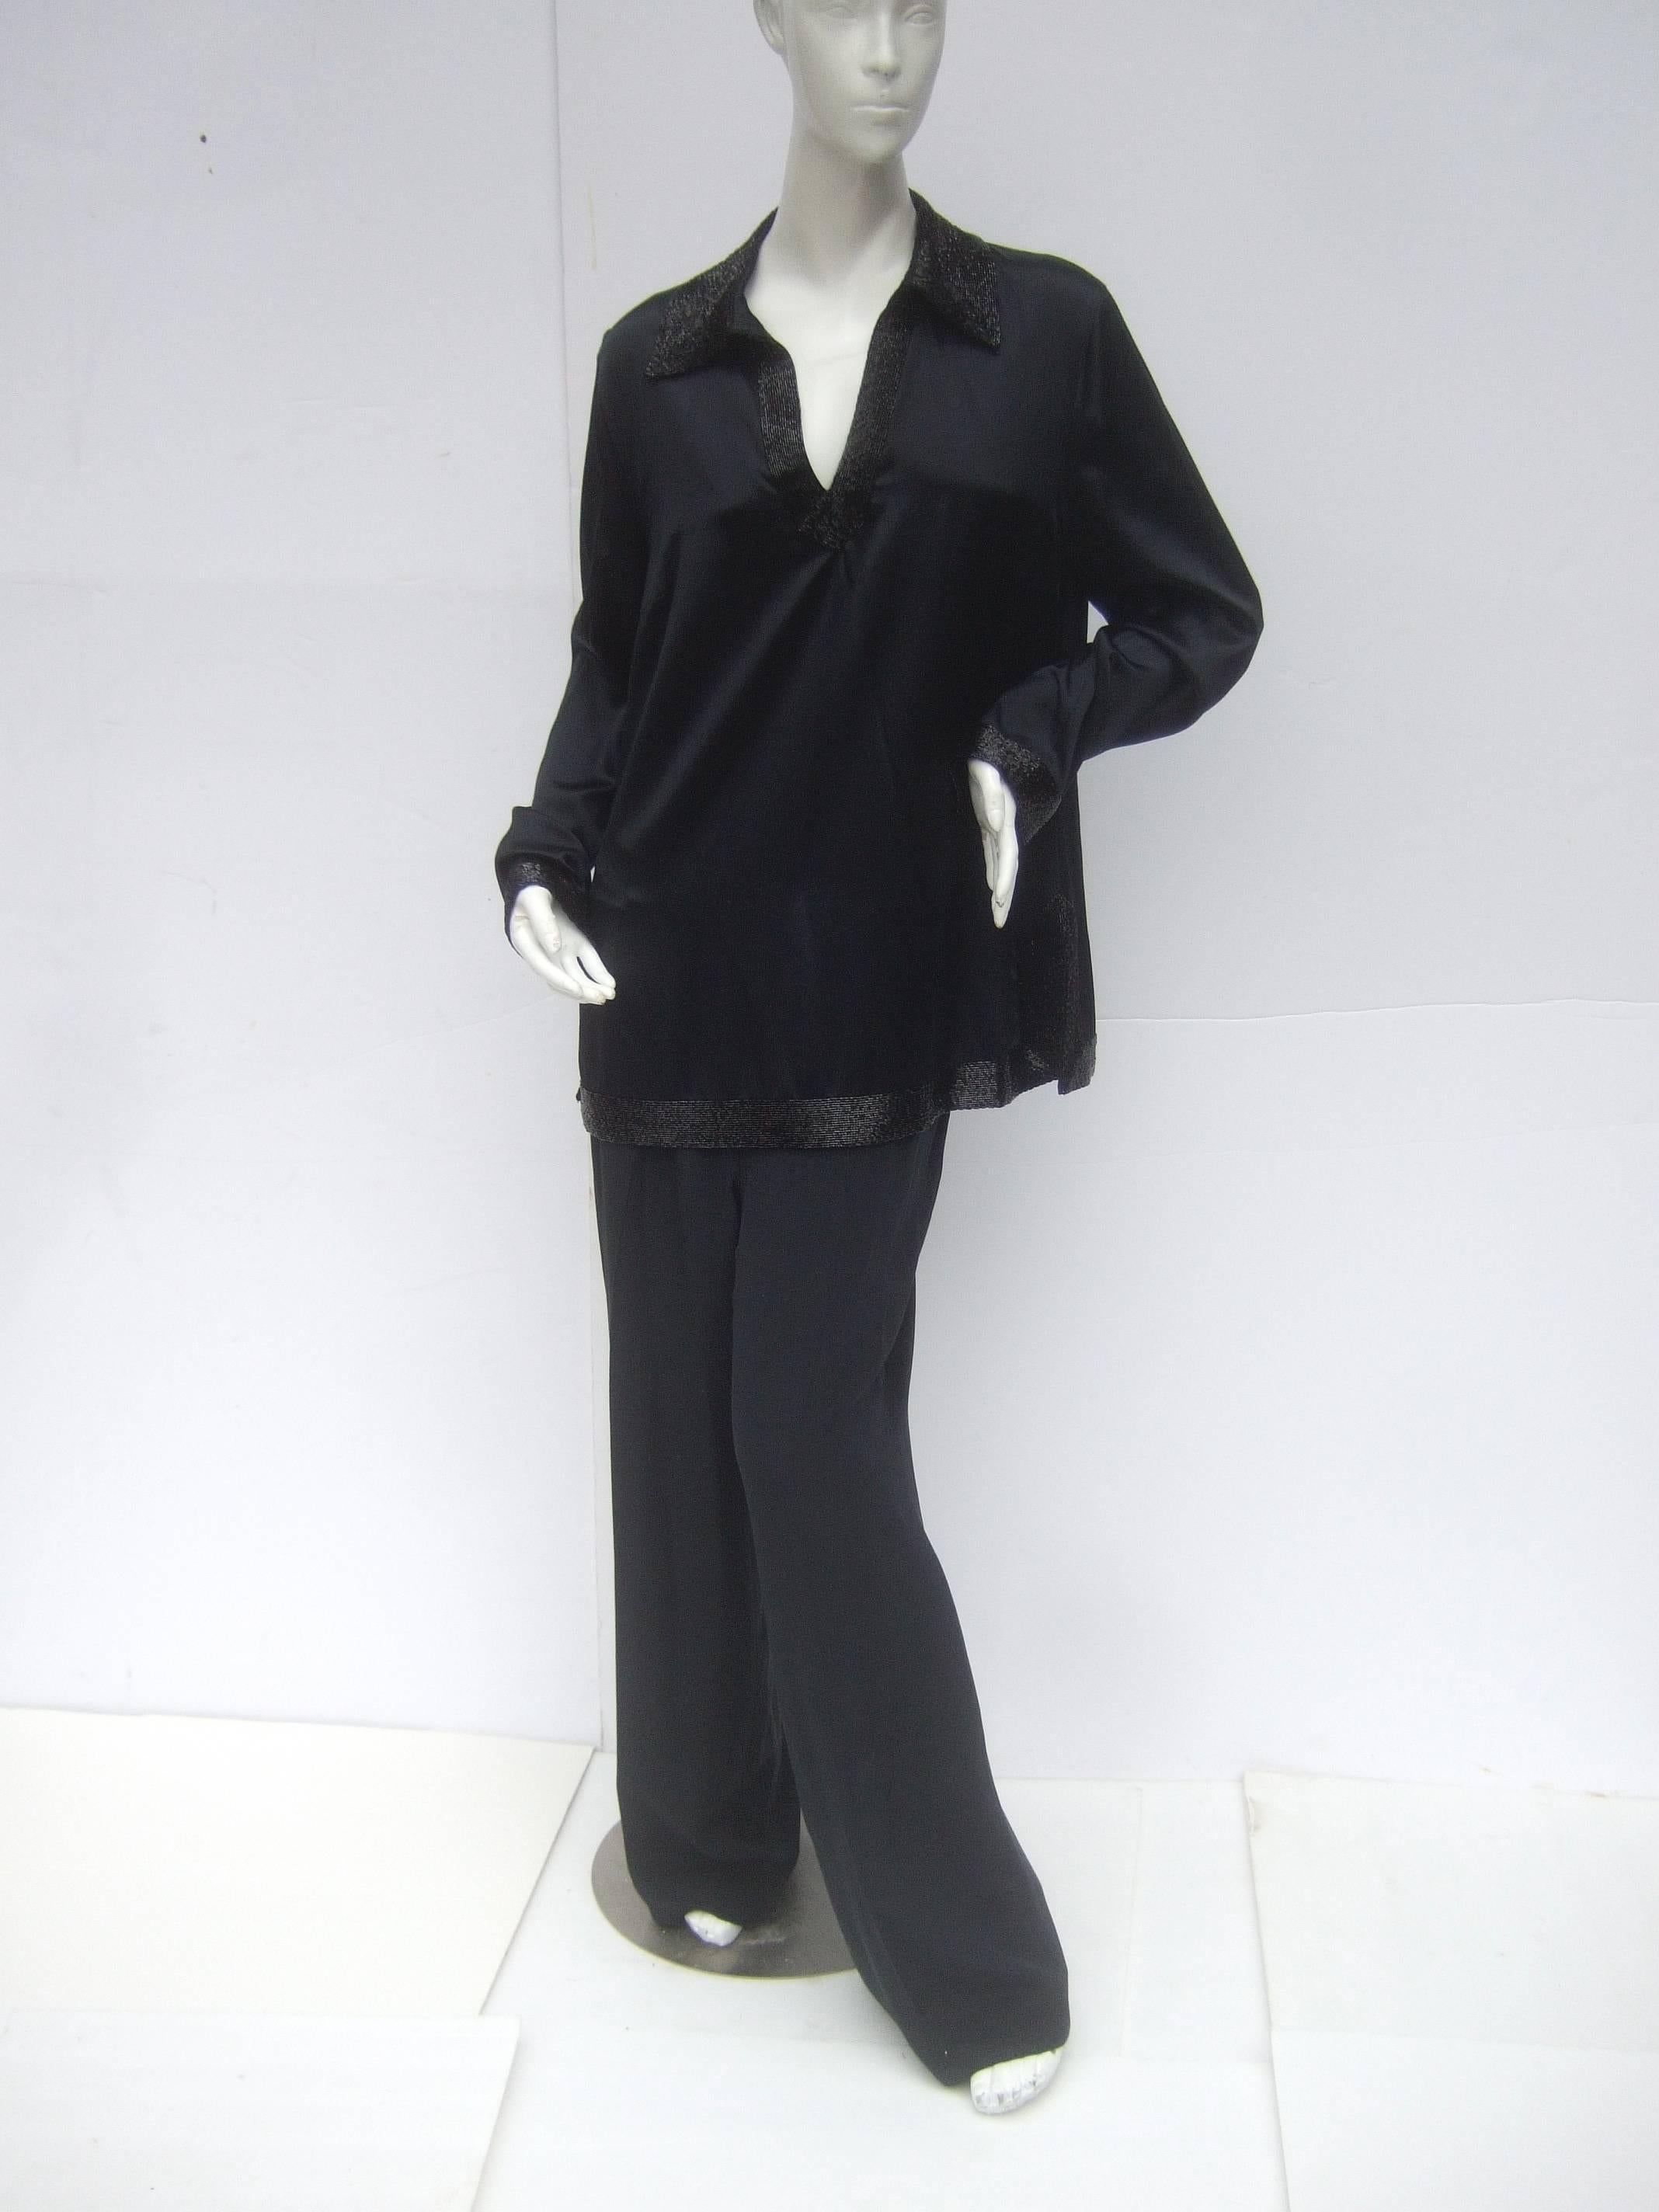 Jaeger Elegant black silk charmeuse tunic / trouser ensemble
The stylish tunic is embellished with restrained black 
glass bugle beading around the collar, cuffs and hemline
The tunic blouse is designed with a v-slit on the front;
the sides have